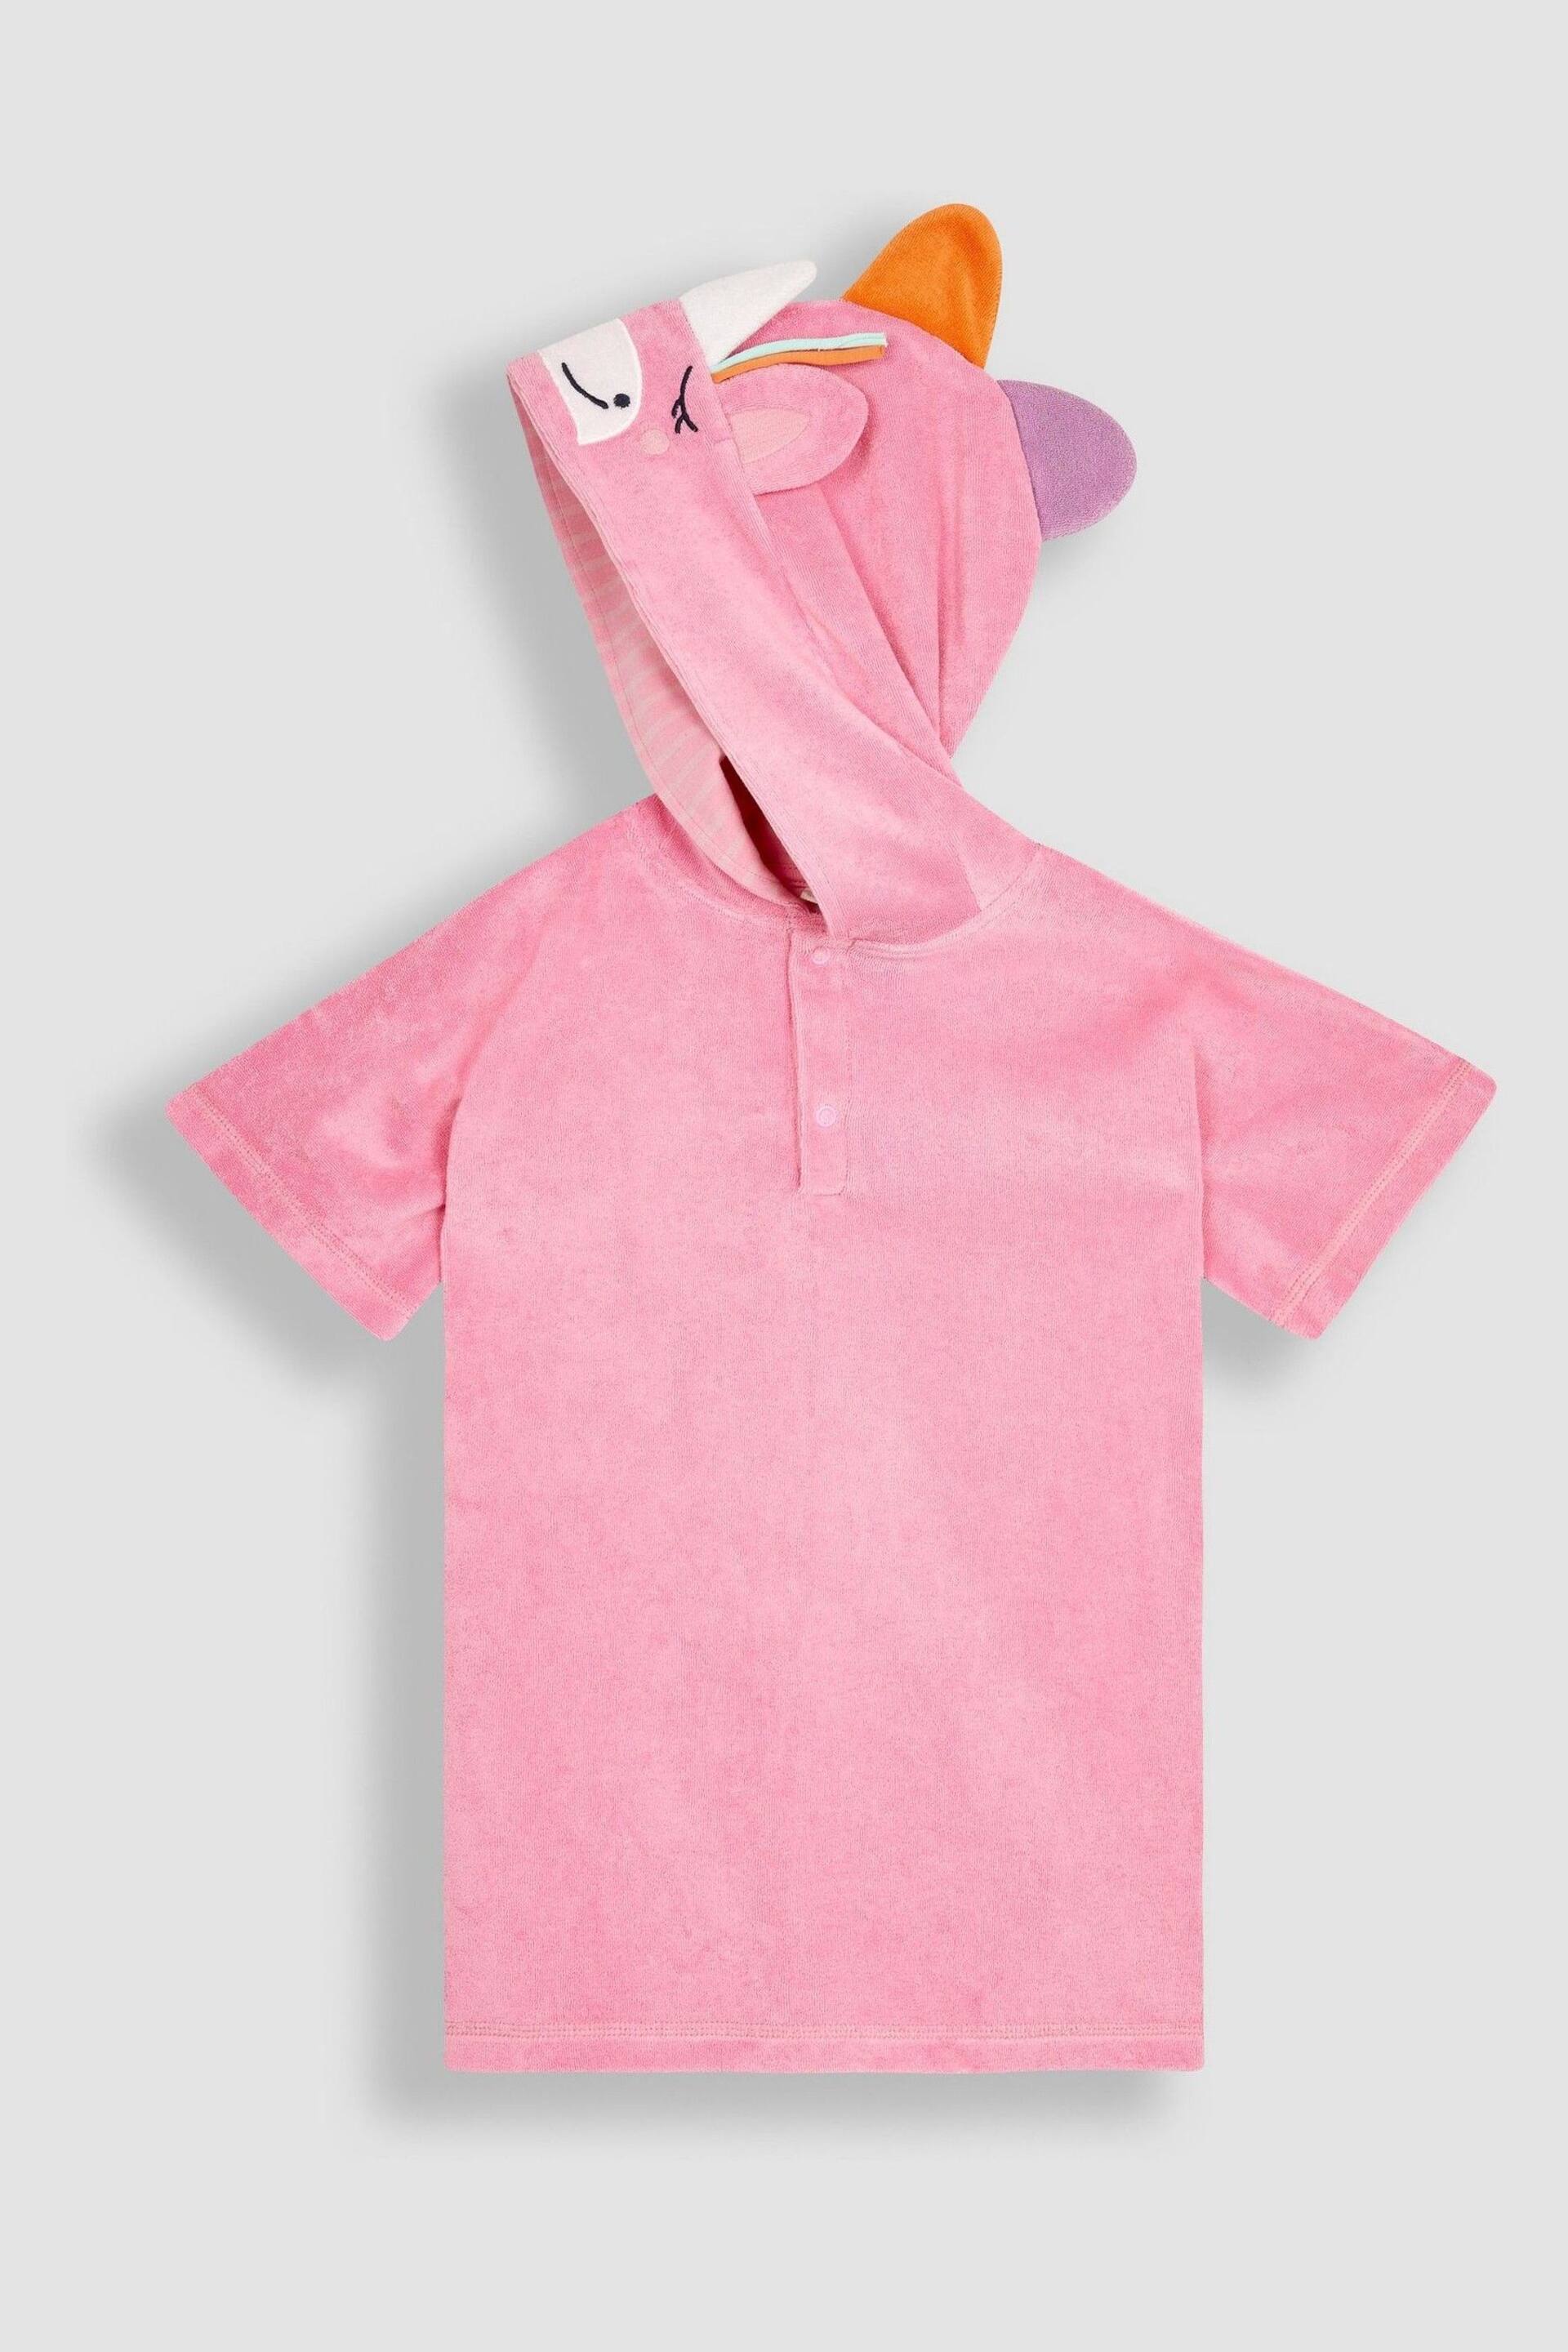 JoJo Maman Bébé Pink Towelling Hooded Poncho - Image 1 of 5